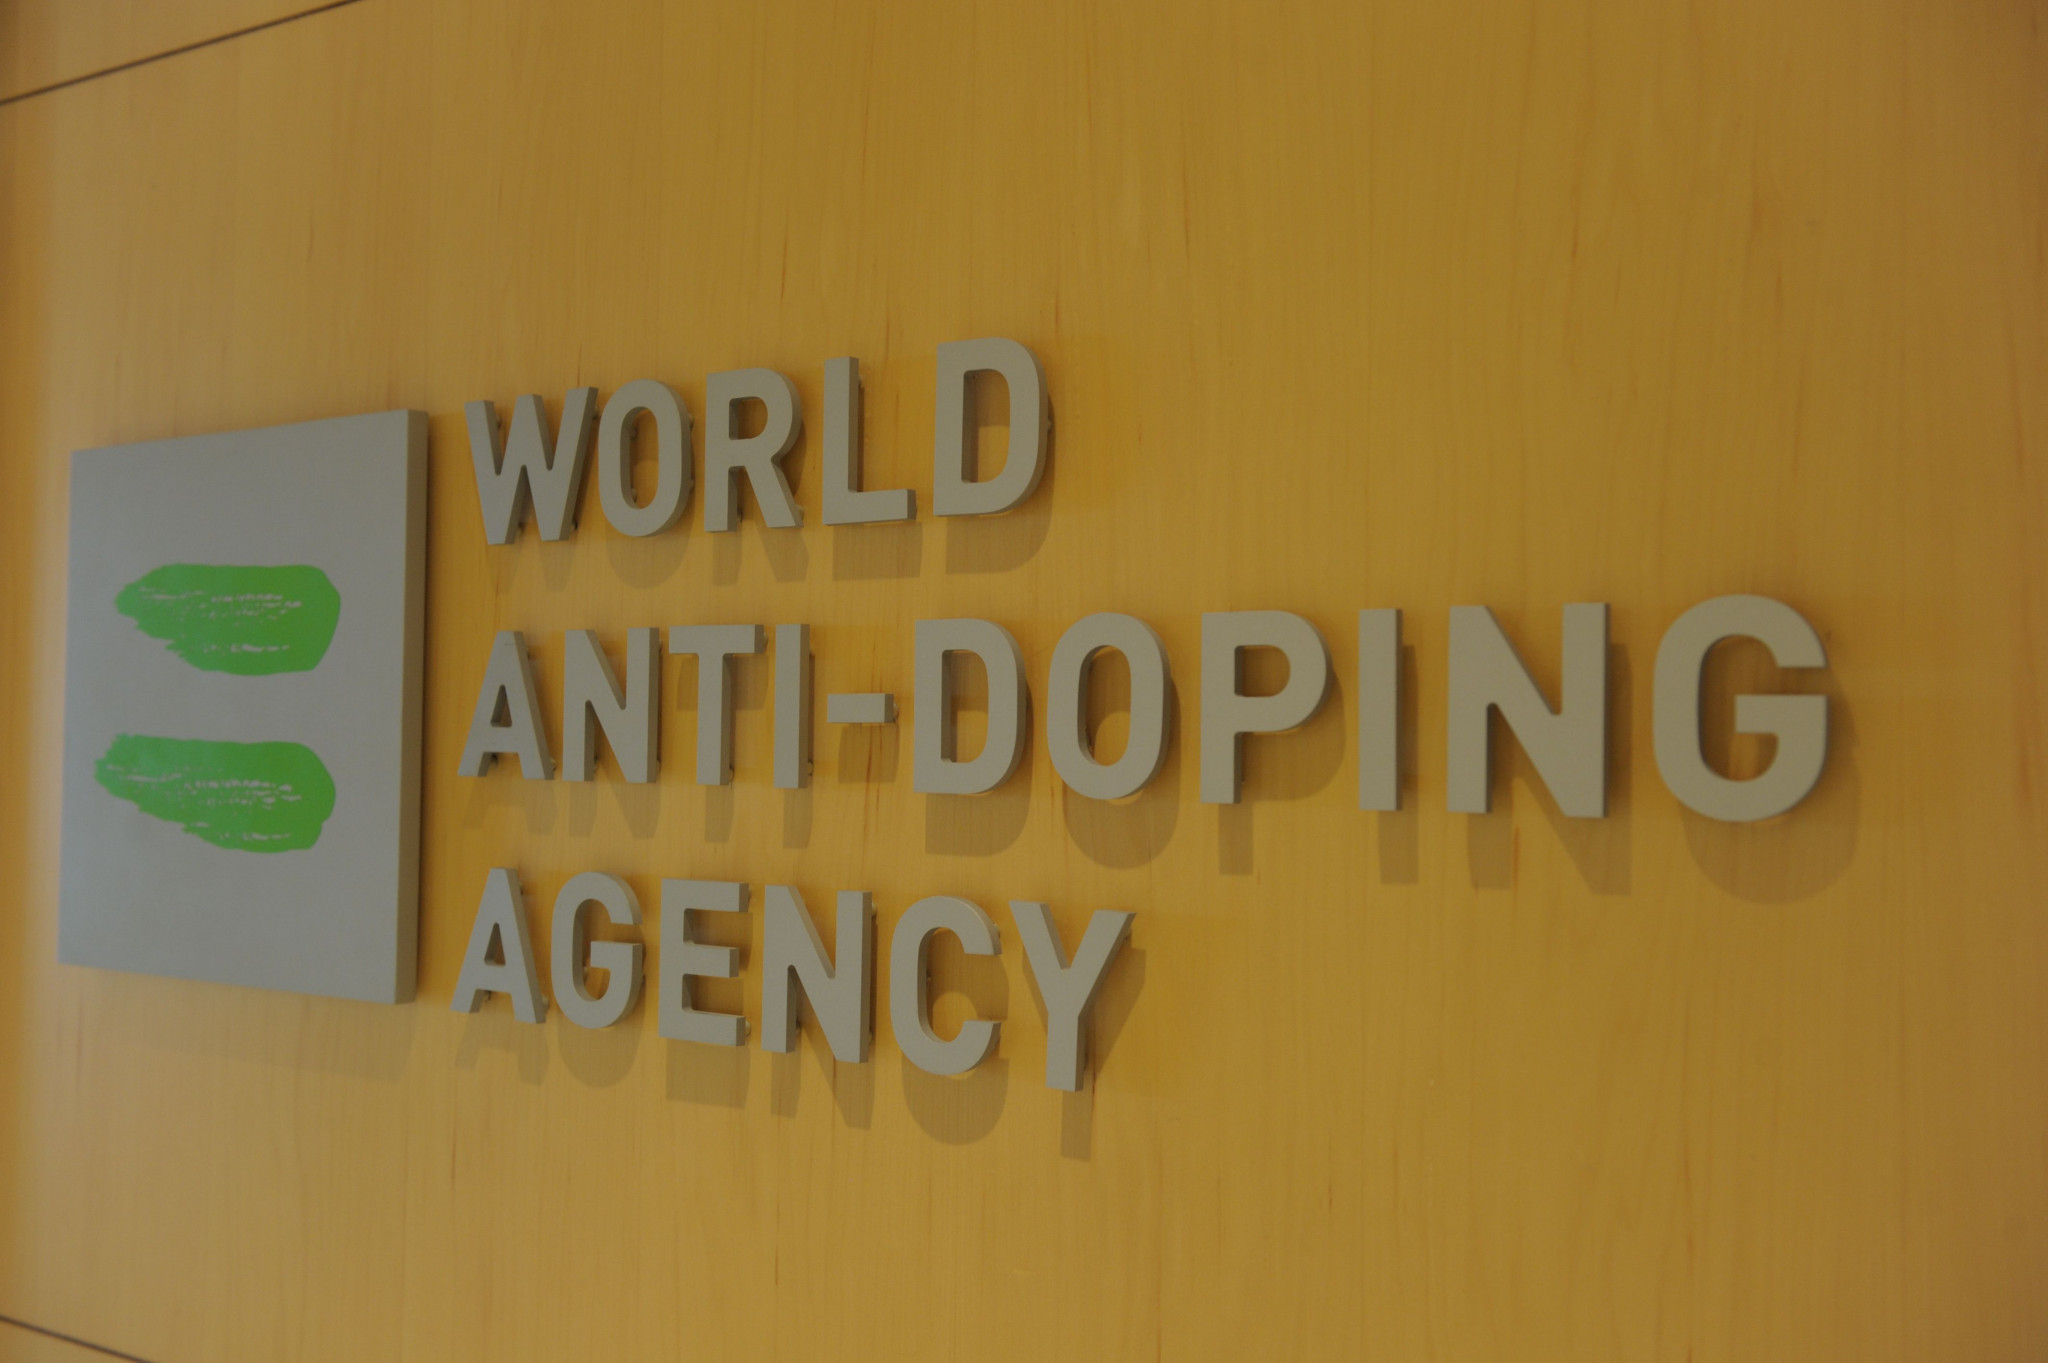 Gas chromatography combustion isotope ratio mass spectrometry has proved useful for the World Anti-Doping Agency ©WADA